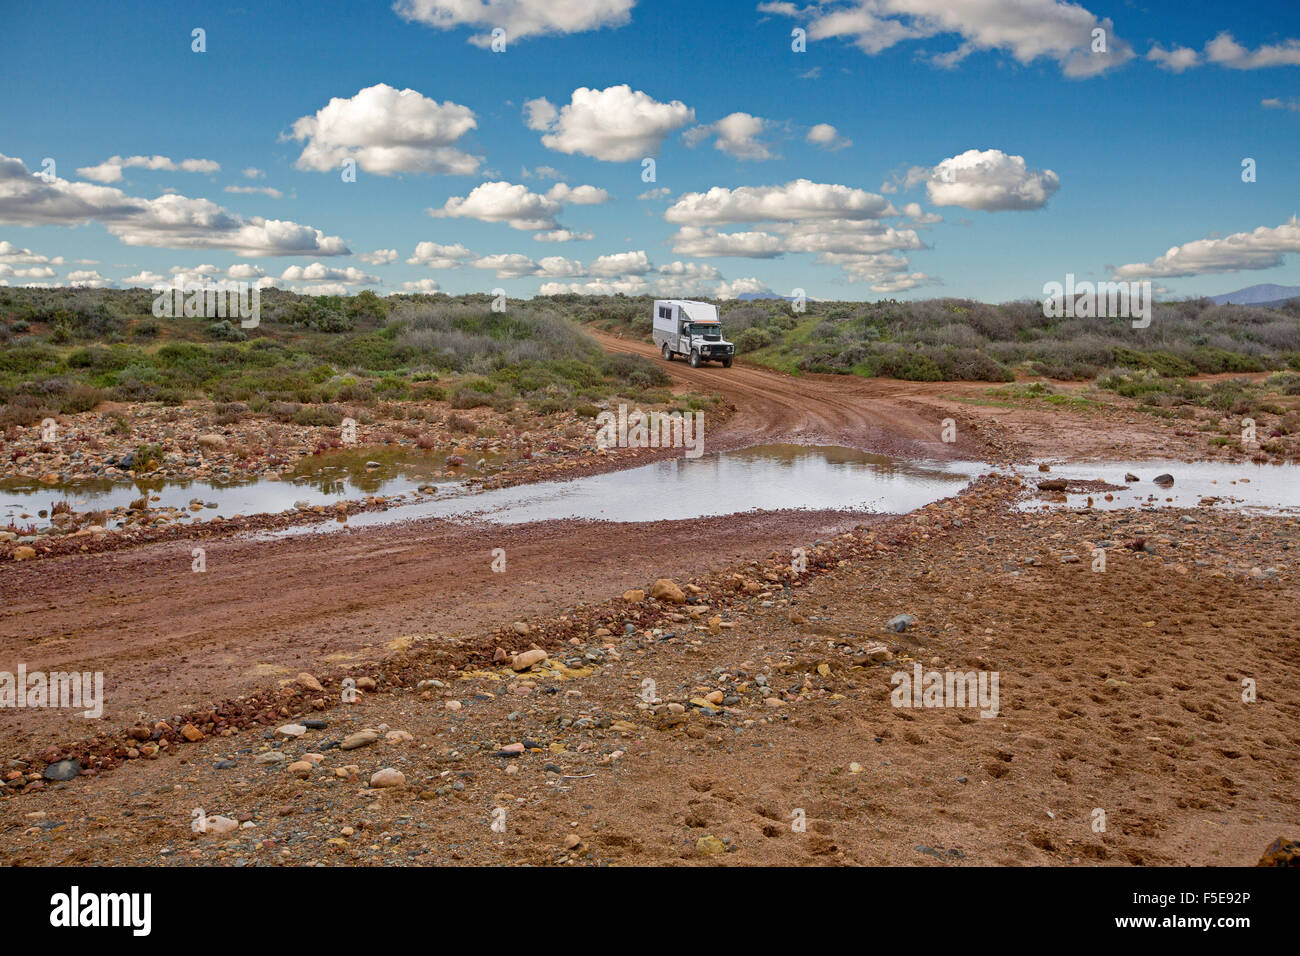 Four wheel drive campervan / motorhome about to drive through water at creek crossing on Australian outback road hemmed by low vegetation after rain Stock Photo